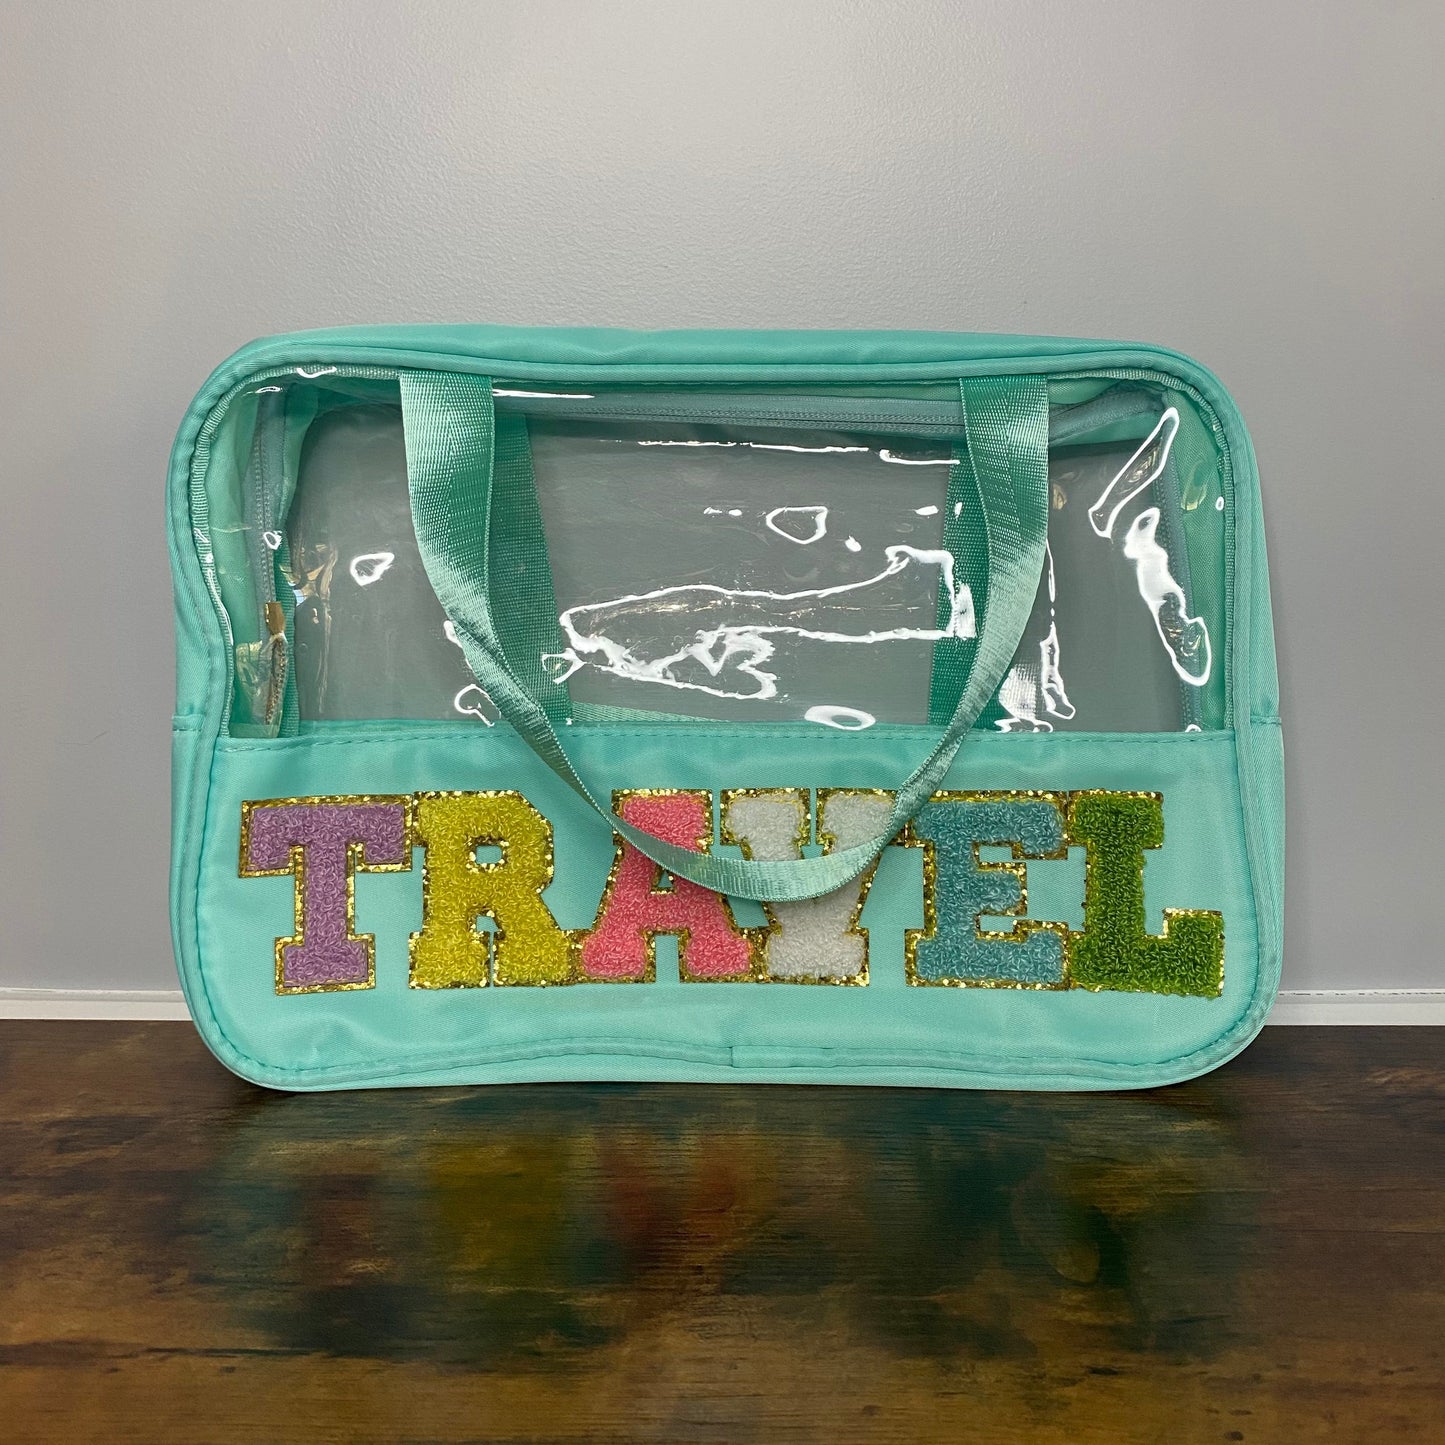 Clear Travel Case - LOCAL PICK UP OPTION